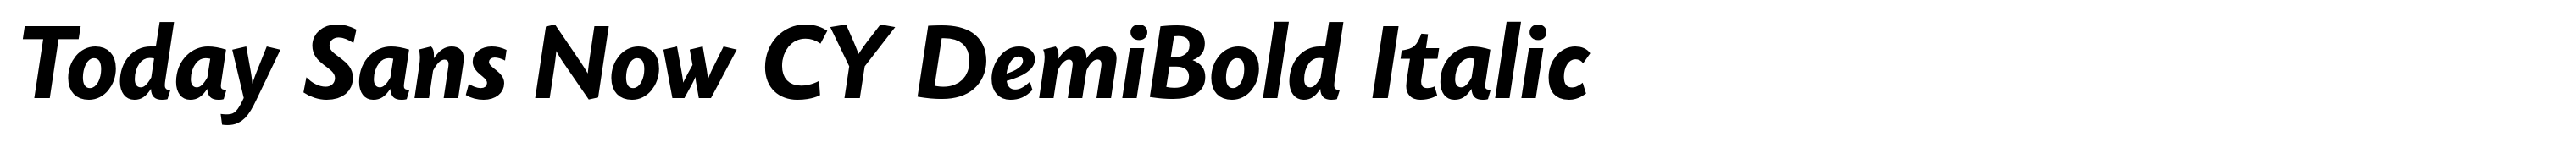 Today Sans Now CY DemiBold Italic